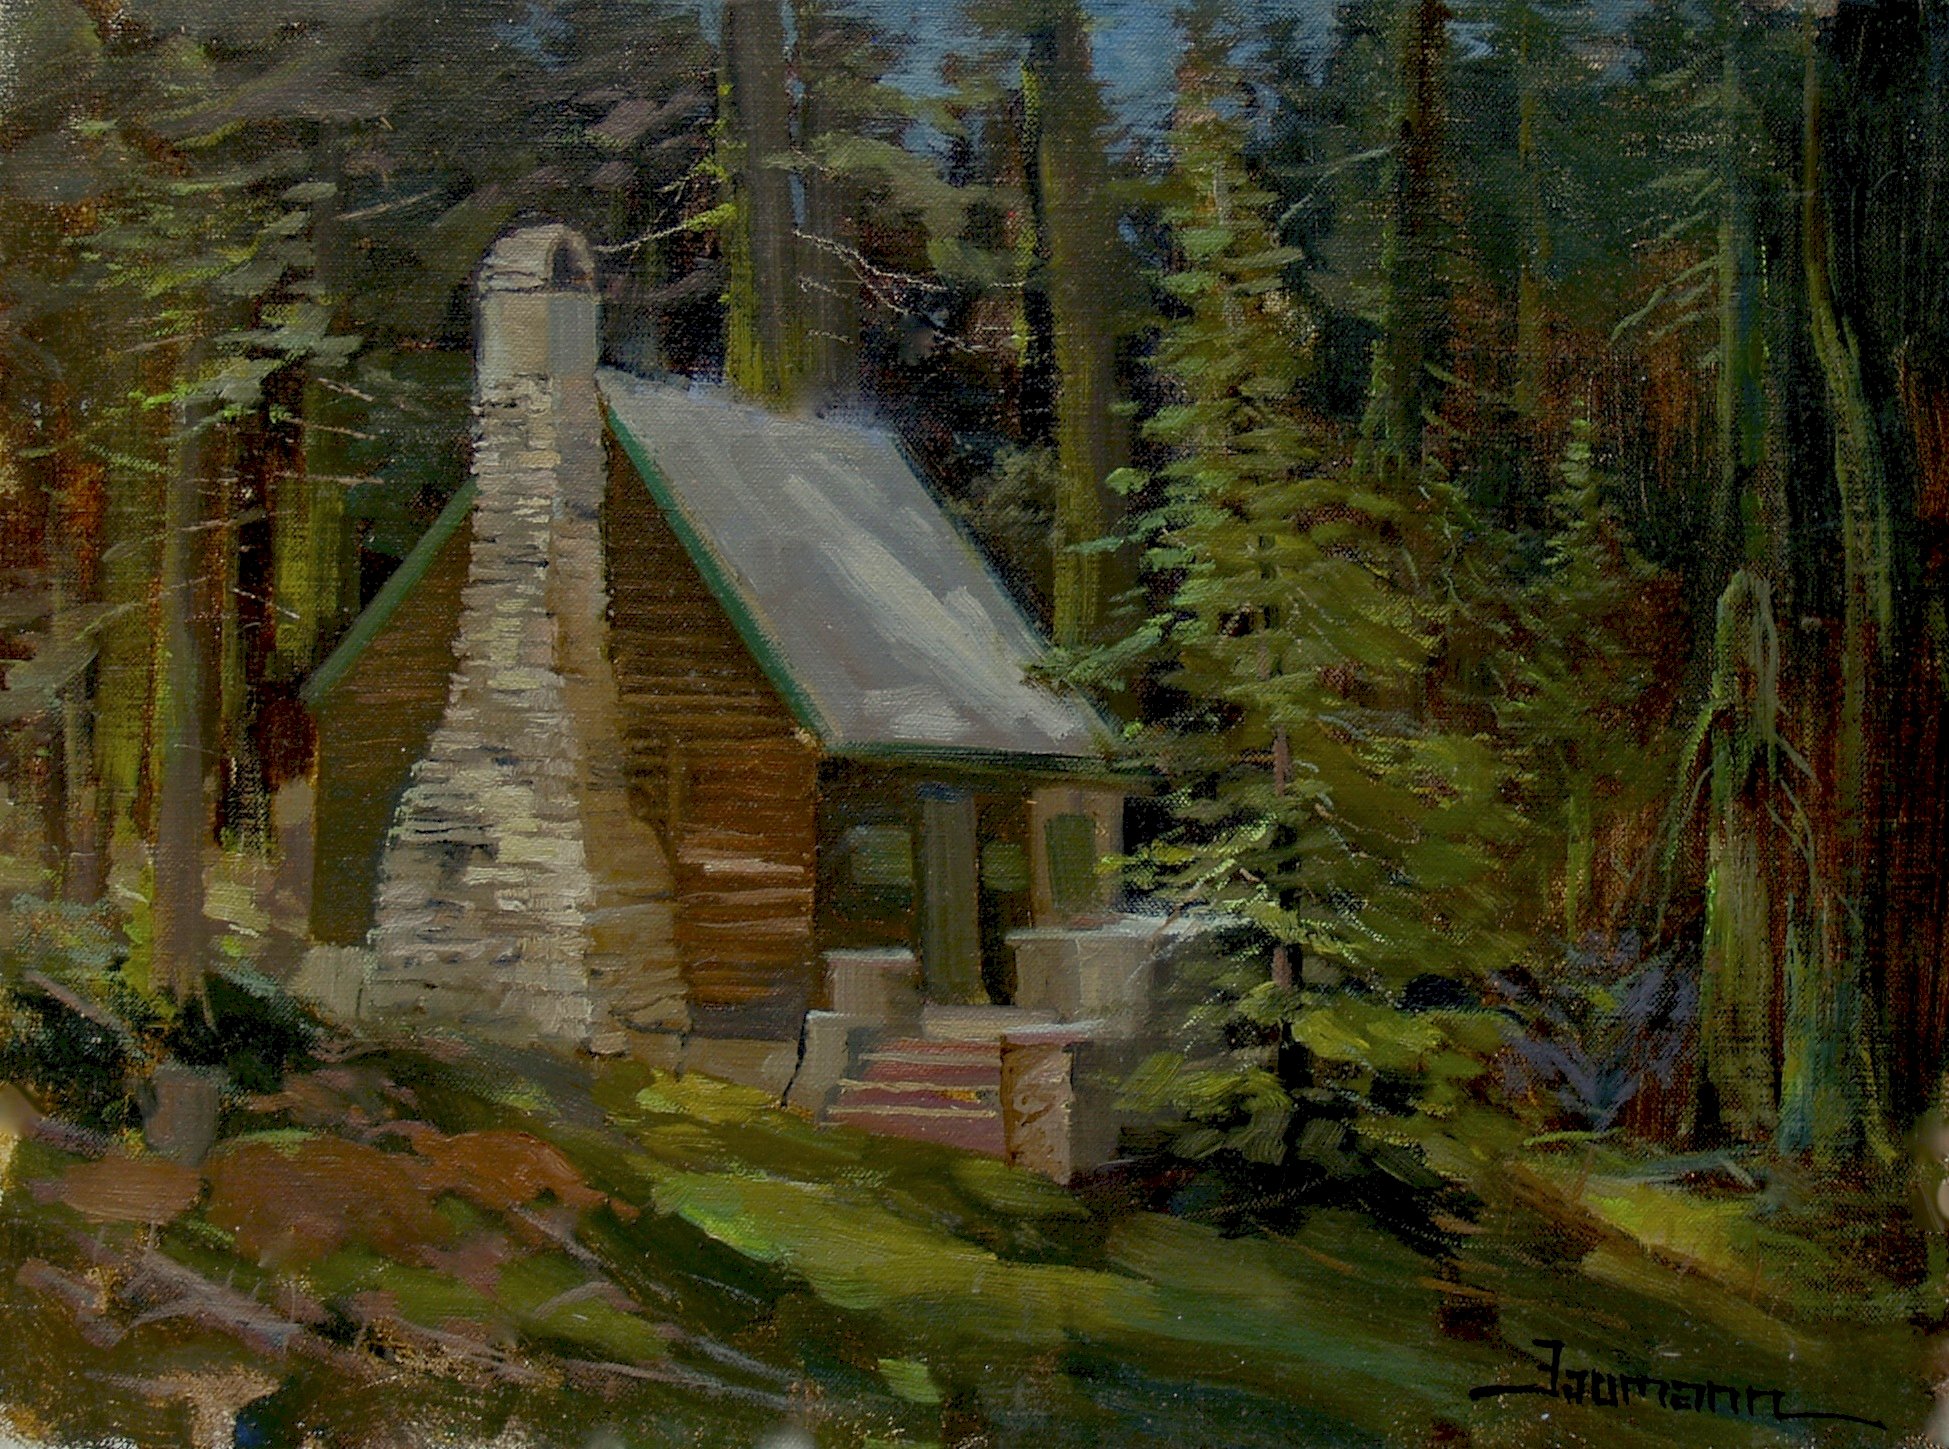 The Artist's Cabin is an oil painting of a log cabin with a stone chimney located in Lake Tahoe near Echo Lake painted by Stefan Baumann.